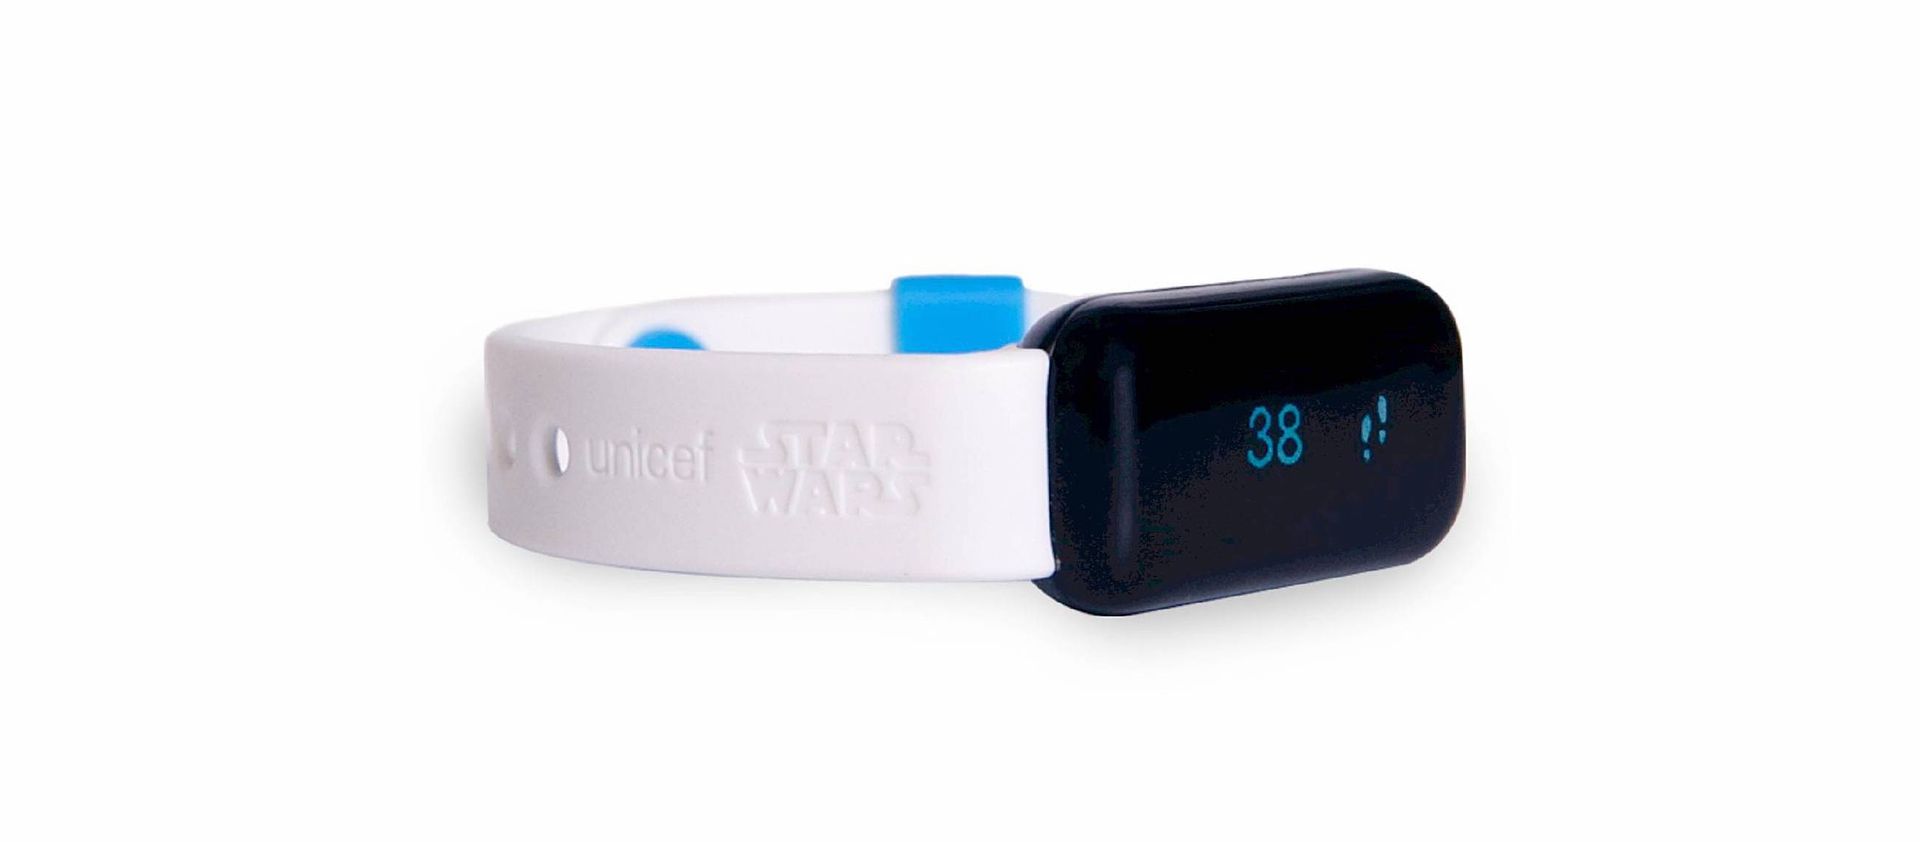 UNICEF Star Wars limited edition power band tracks fitness activity while donating back to kids in need